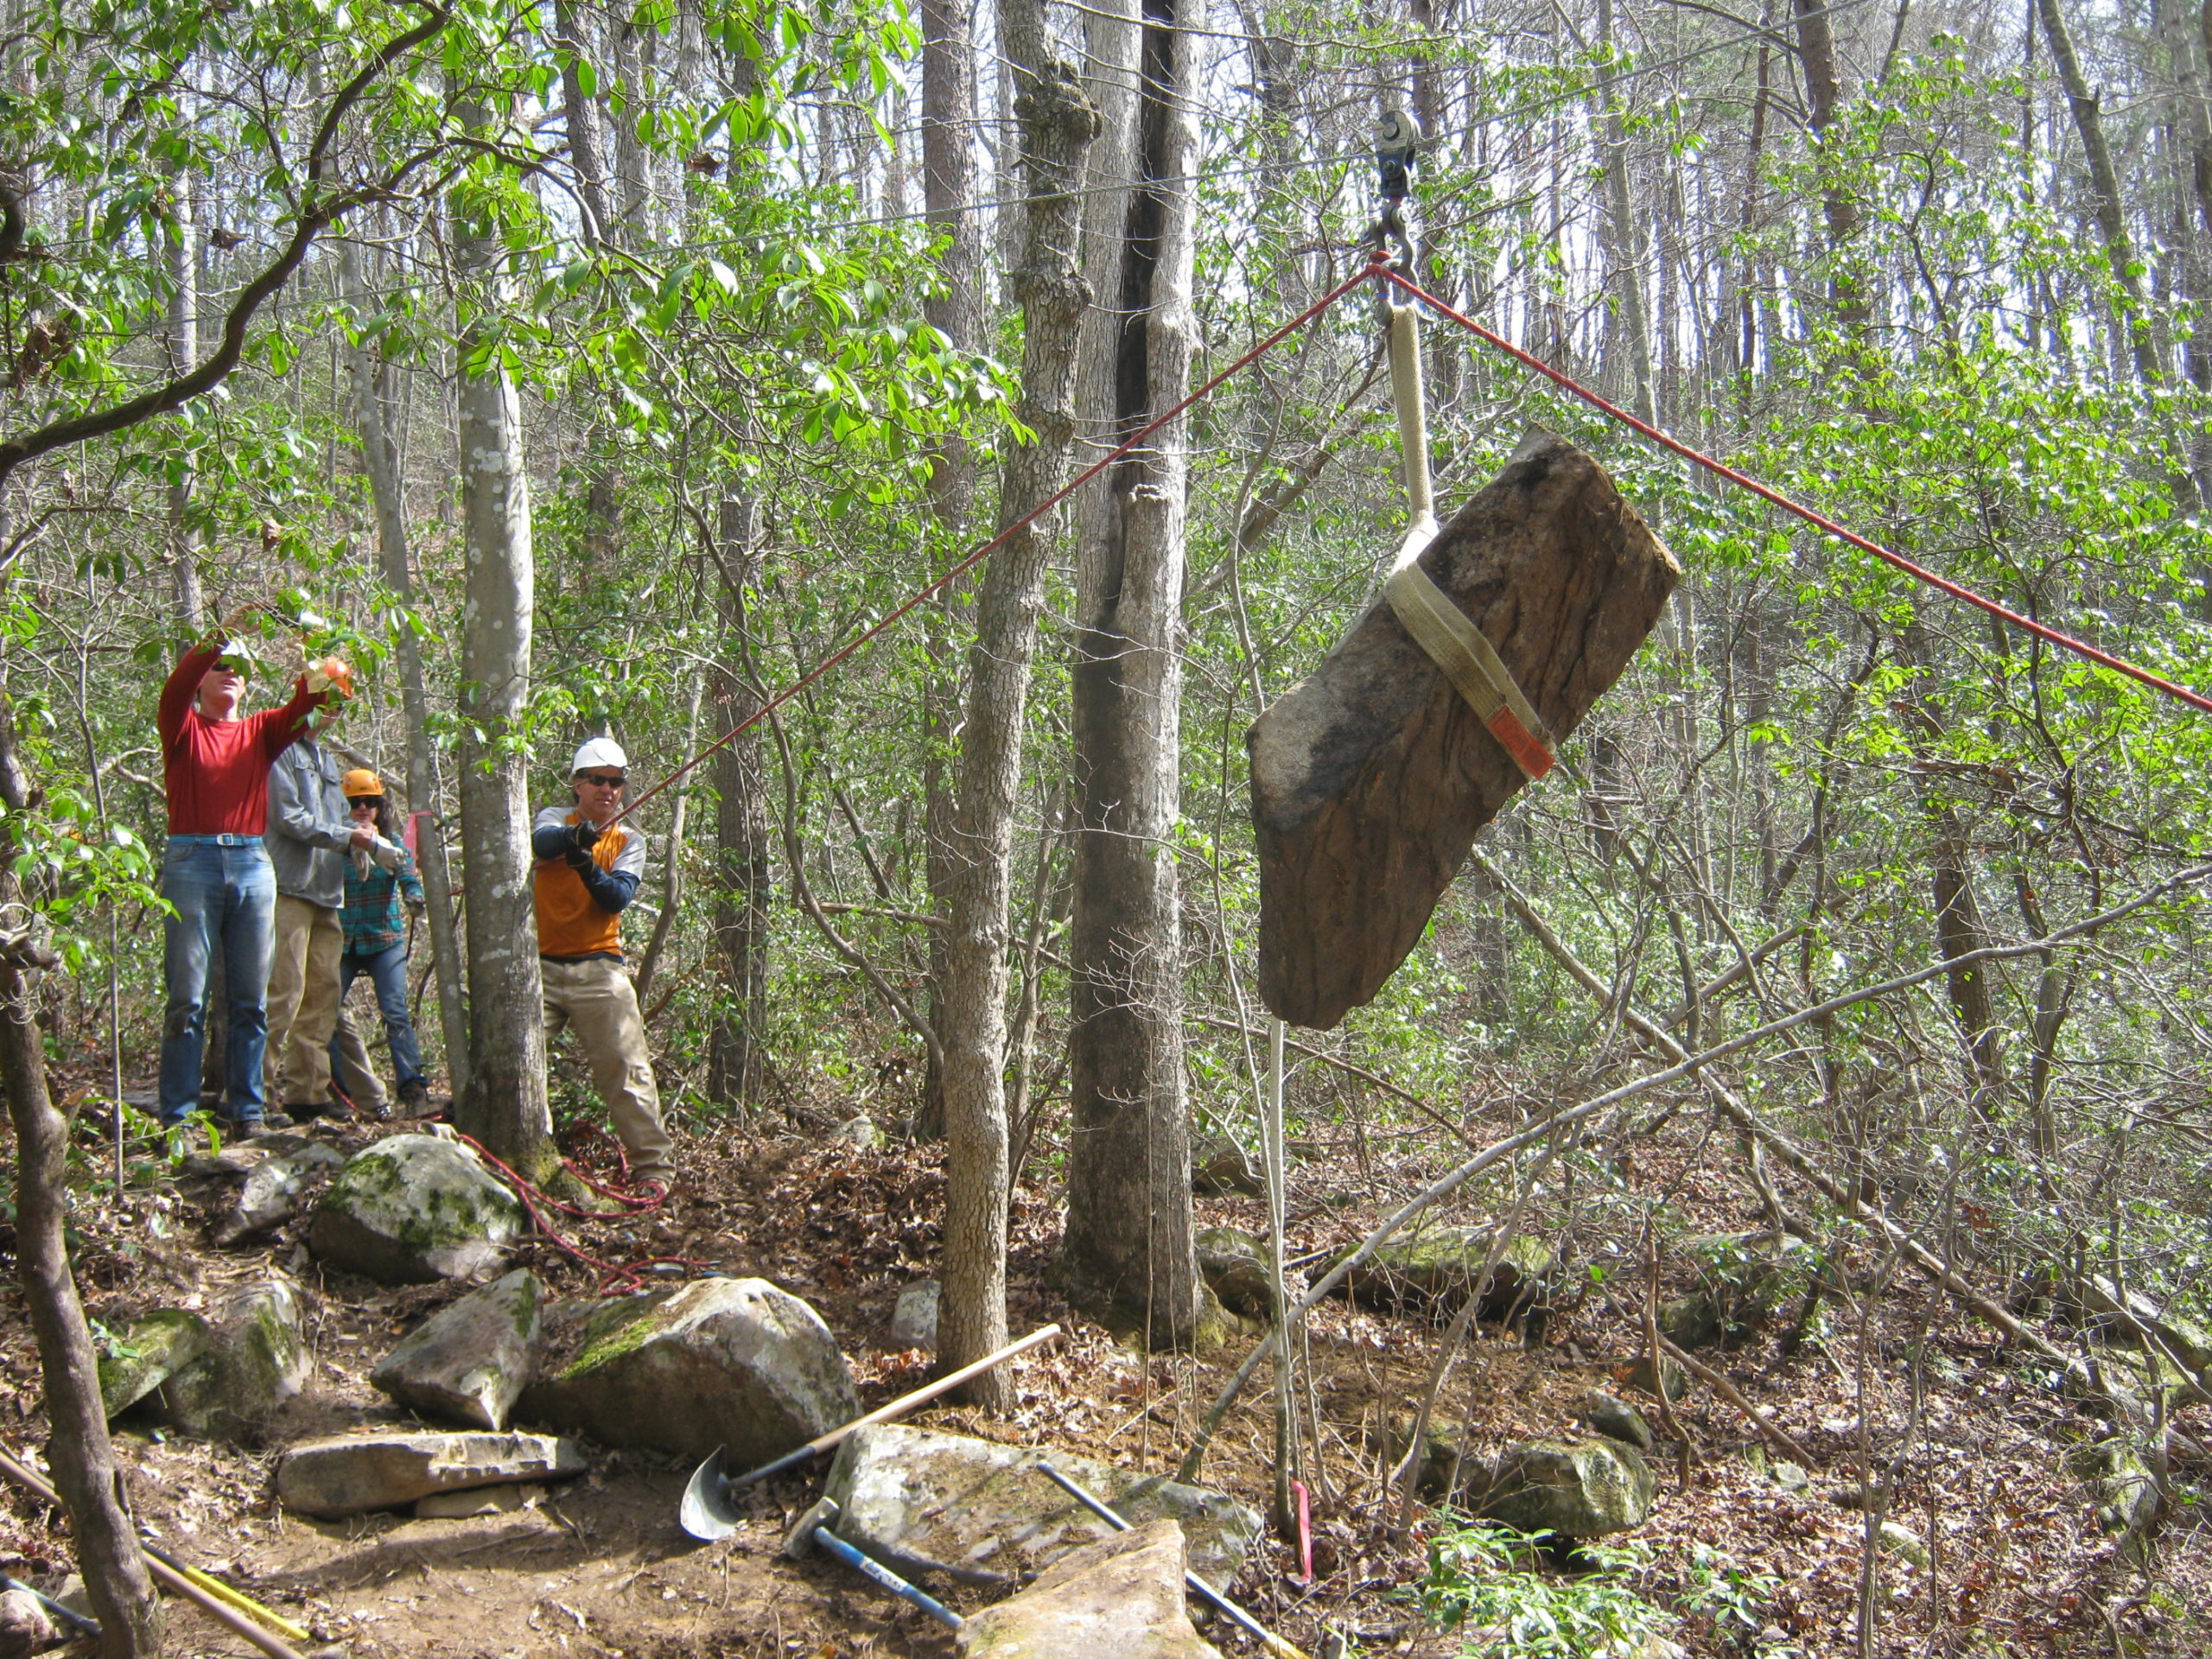 Trail Services: Trail Construction Tools, Rigging Tools, Griphoist